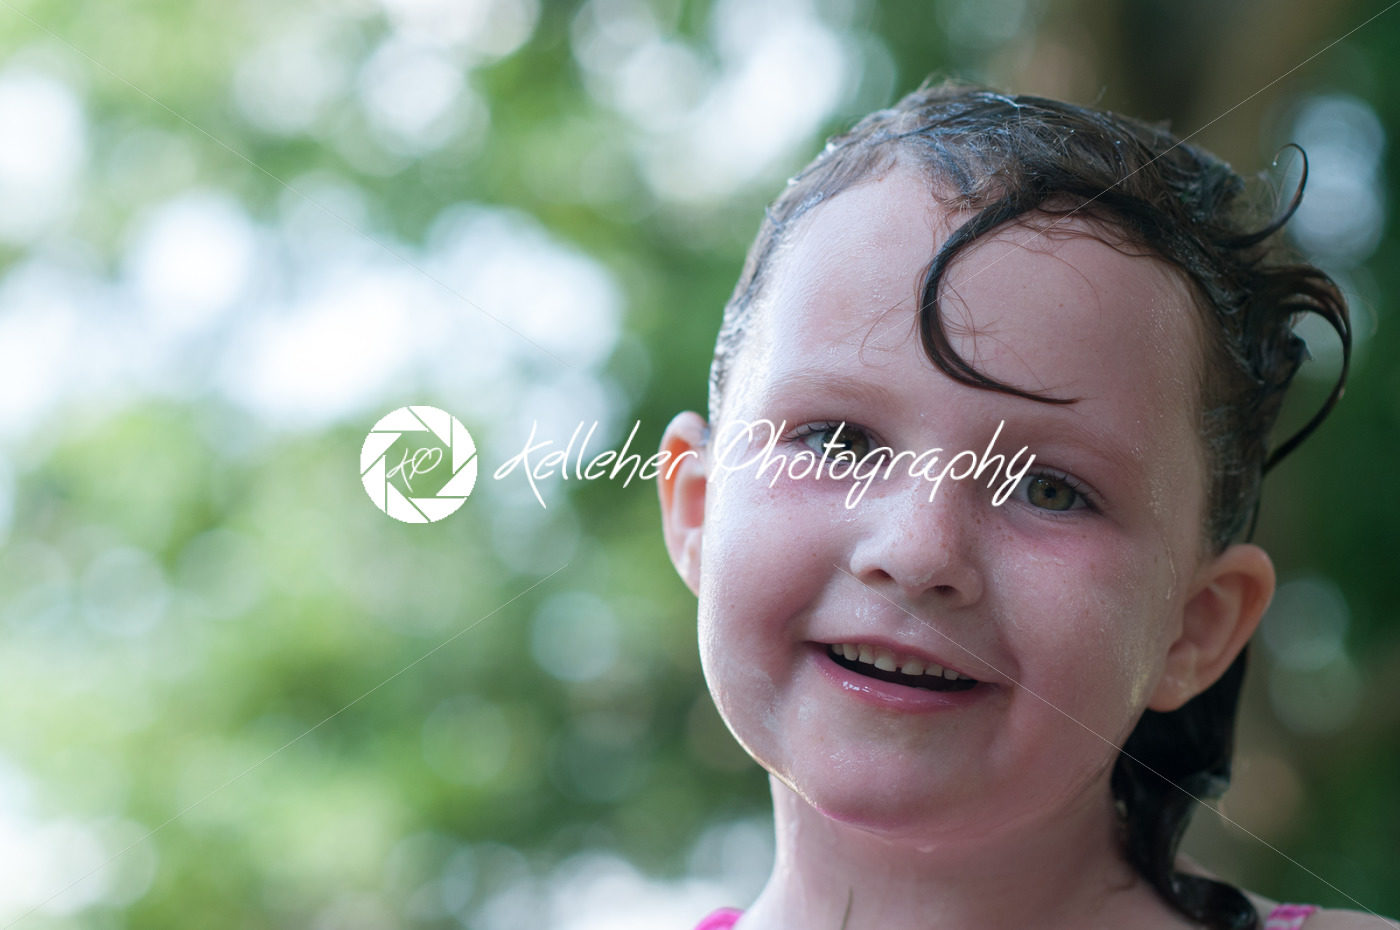 Little girl outside with wet hair after swimming - Kelleher Photography Store